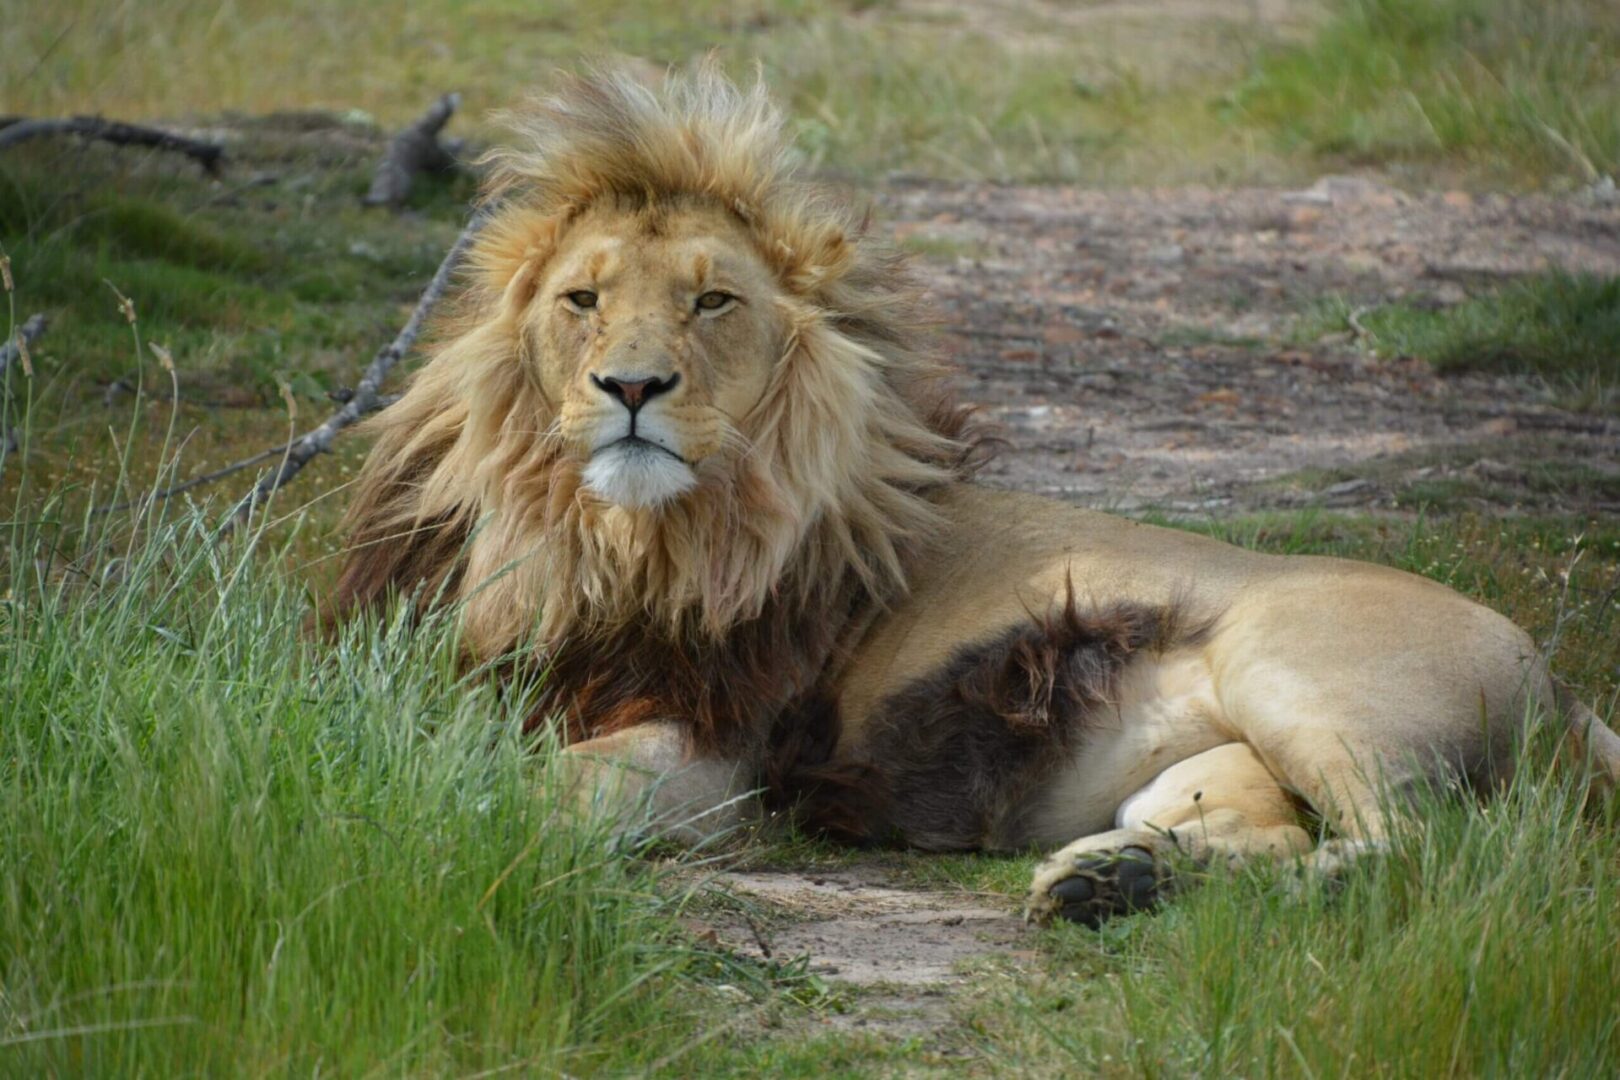 A lion laying down in the grass.